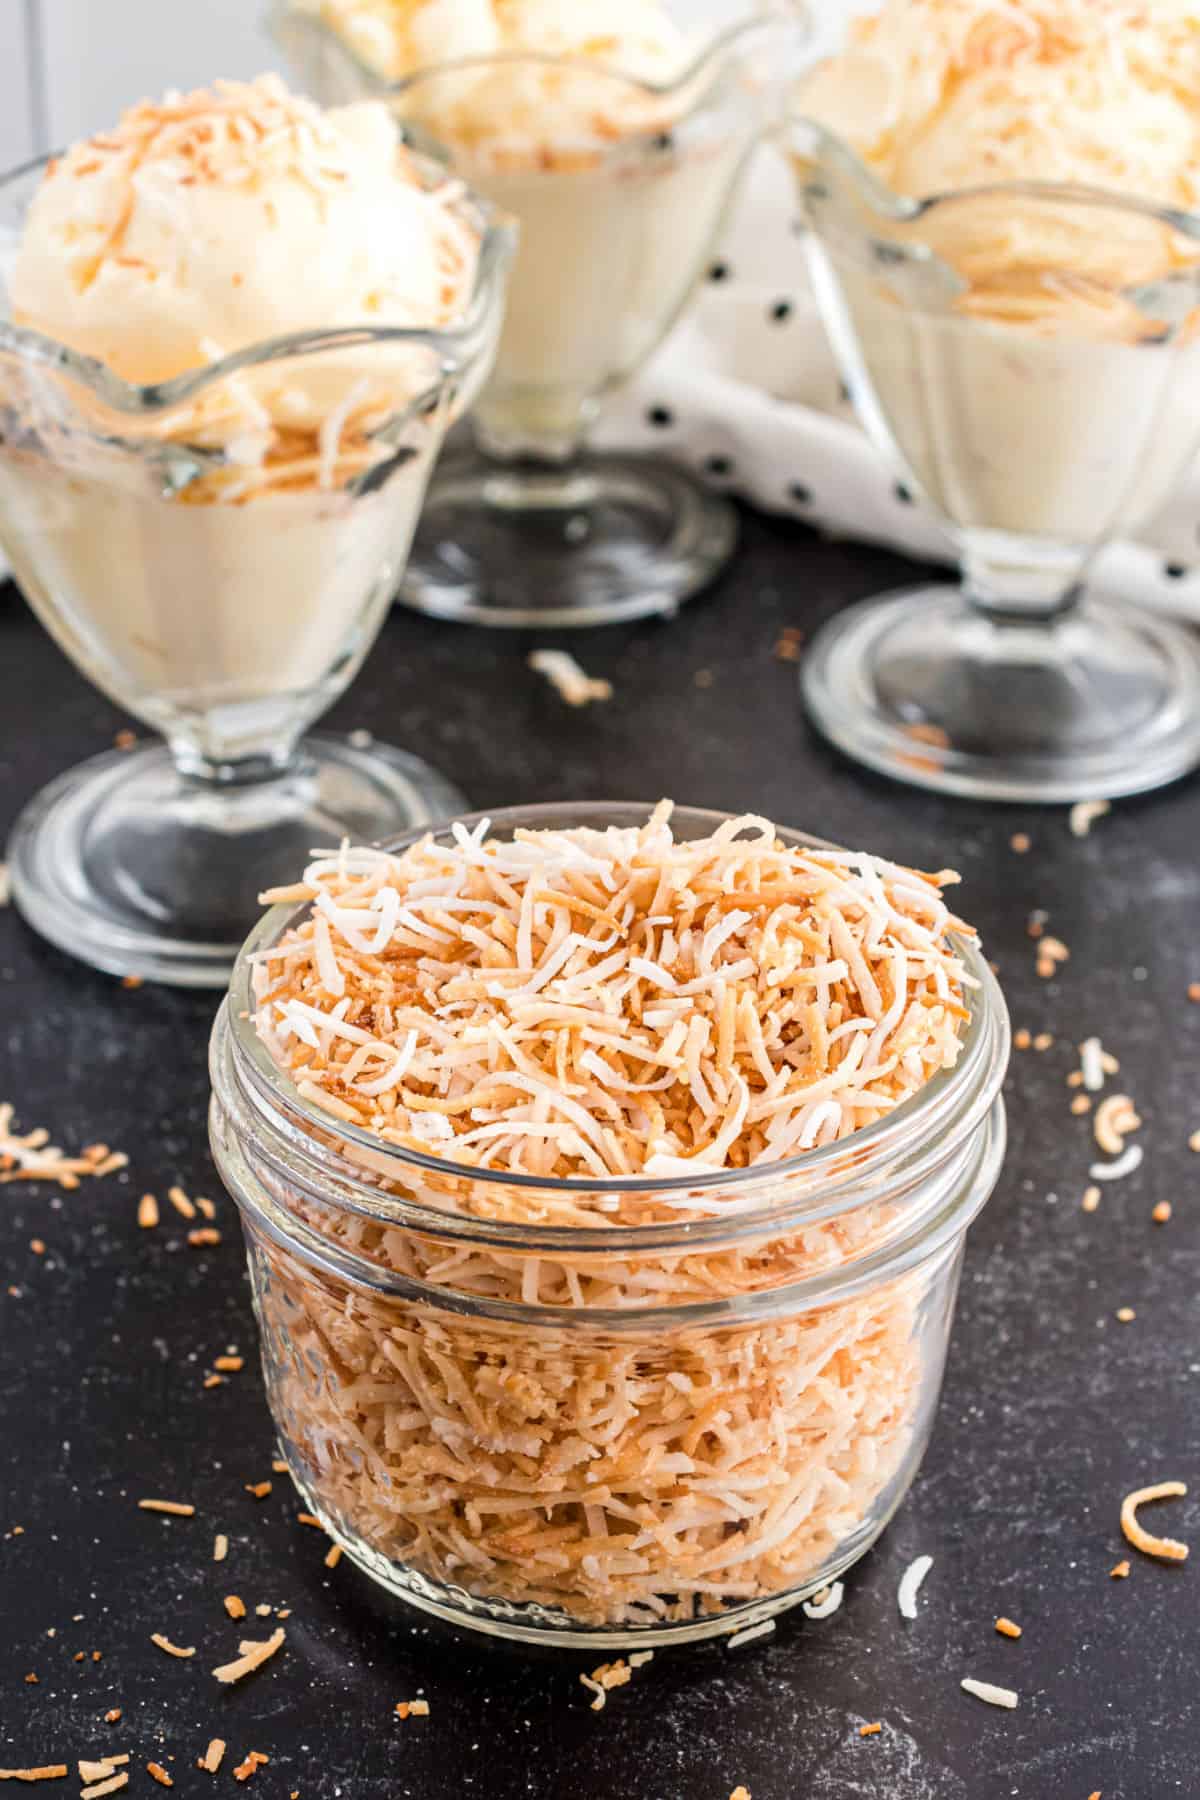 Toasted coconut in a small jar with ice cream in background.